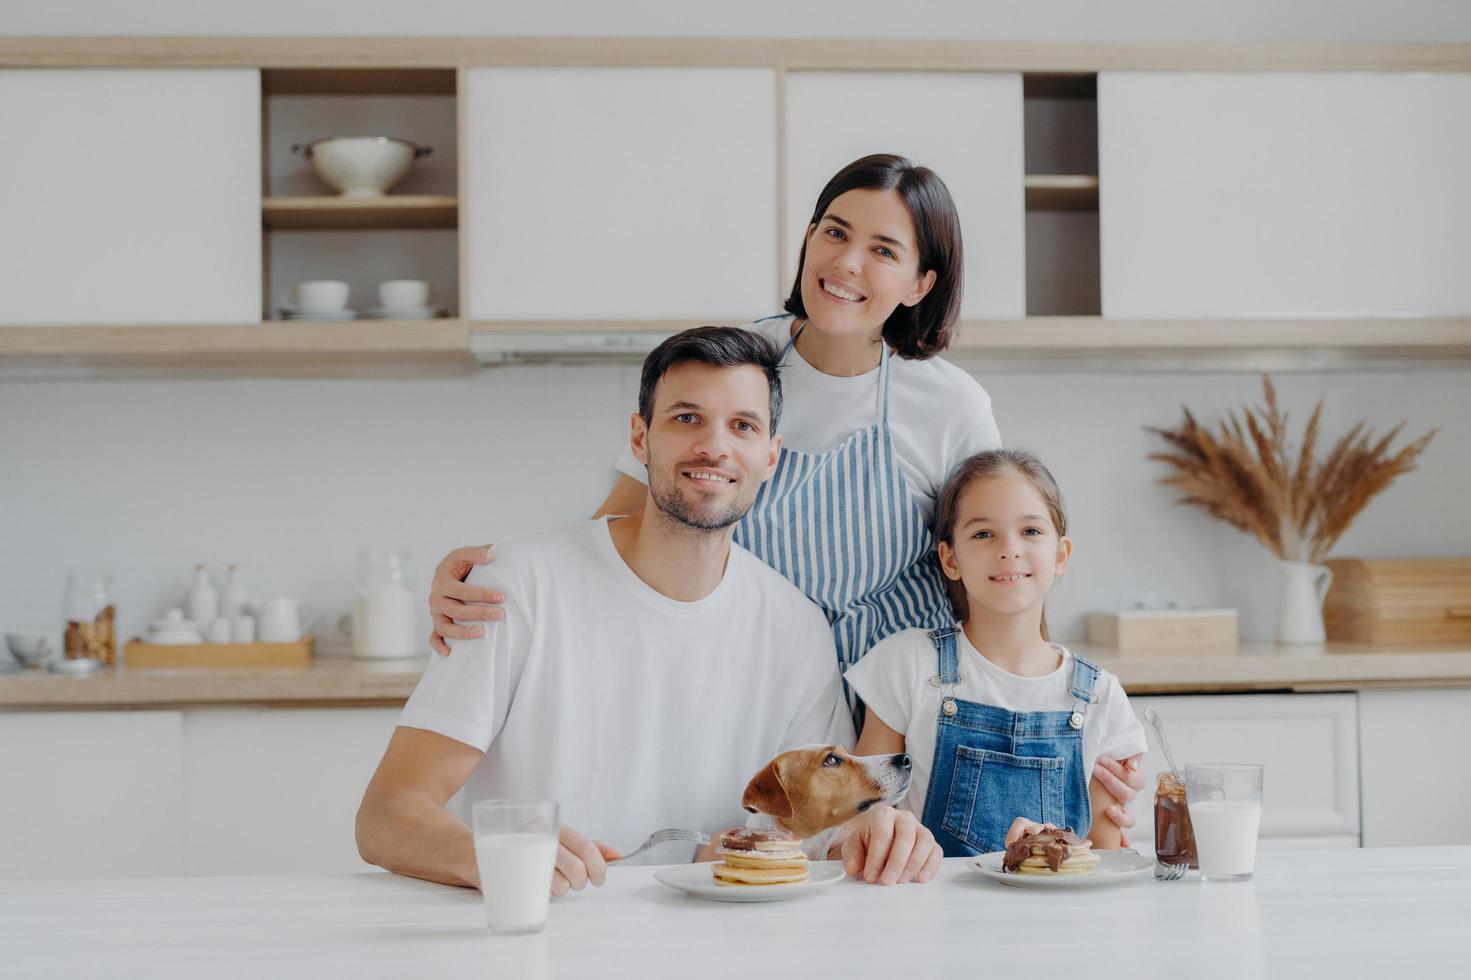 Smiling lovely mother and wife embrces with love daughter and husband, prepared delicious breakfast for them. Little child and father, their pedigree dog eat pancakes in kitchen. Friendly family photo